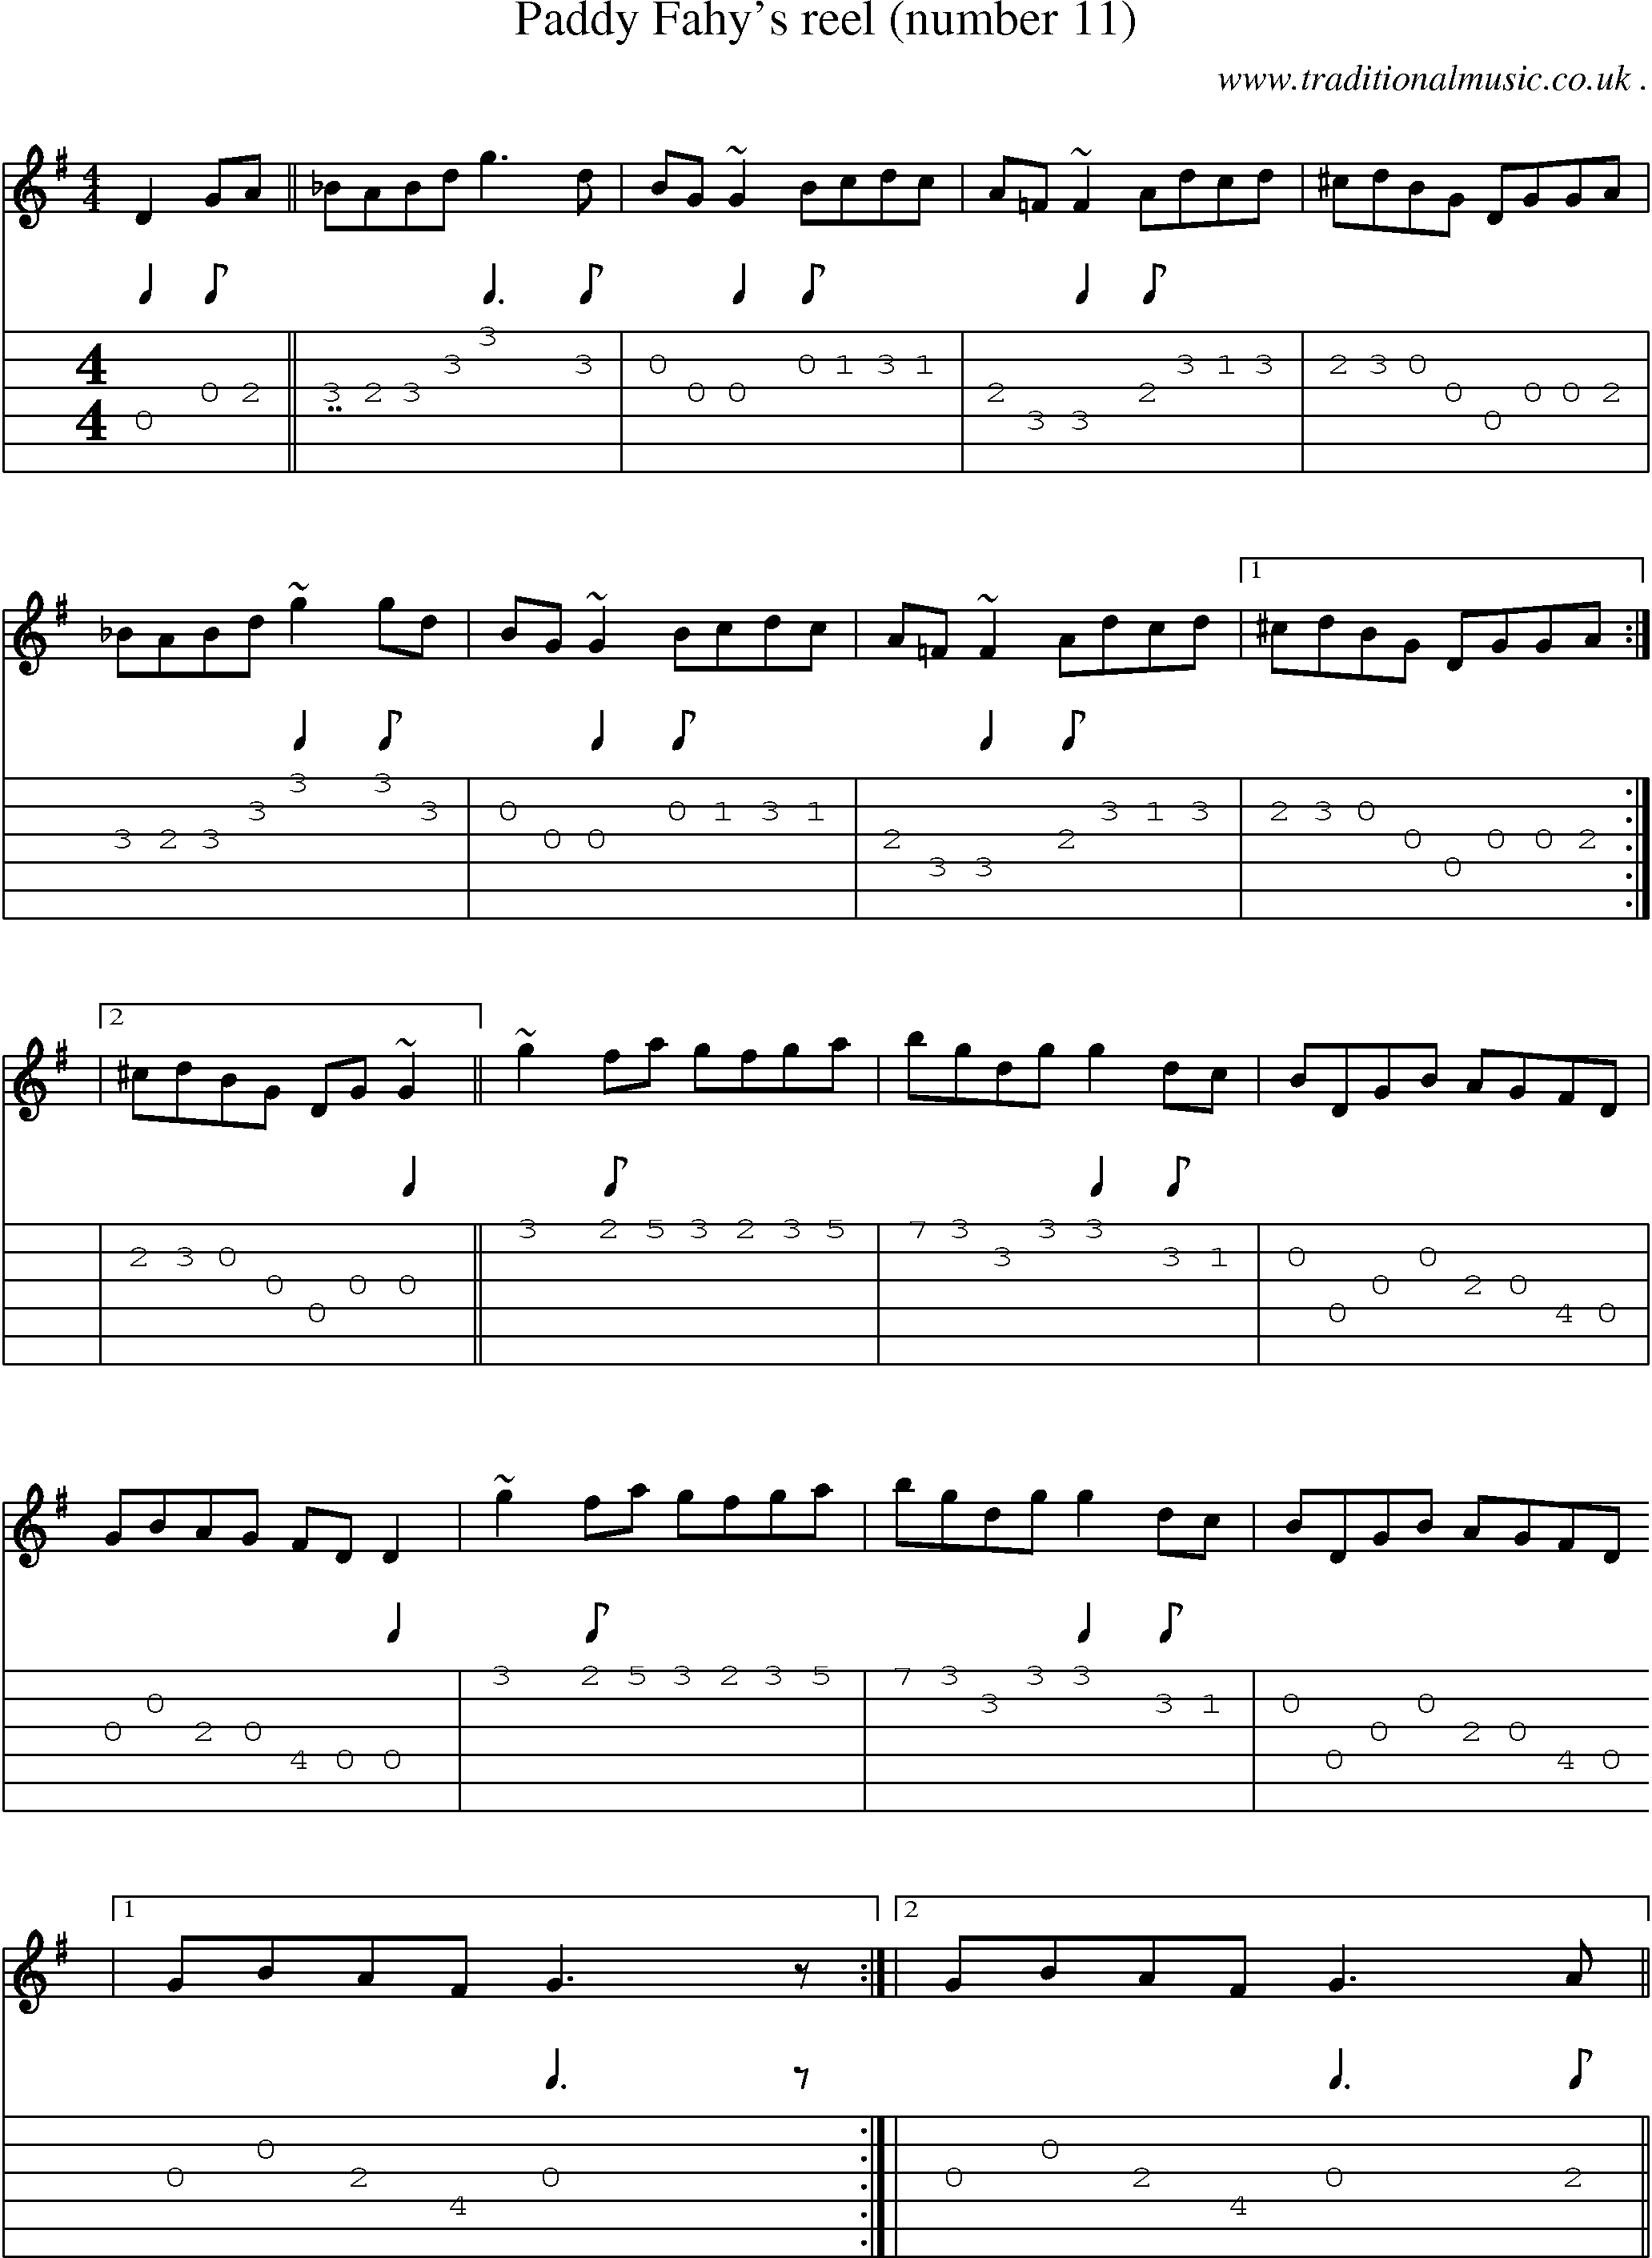 Sheet-music  score, Chords and Guitar Tabs for Paddy Fahys Reel Number 11